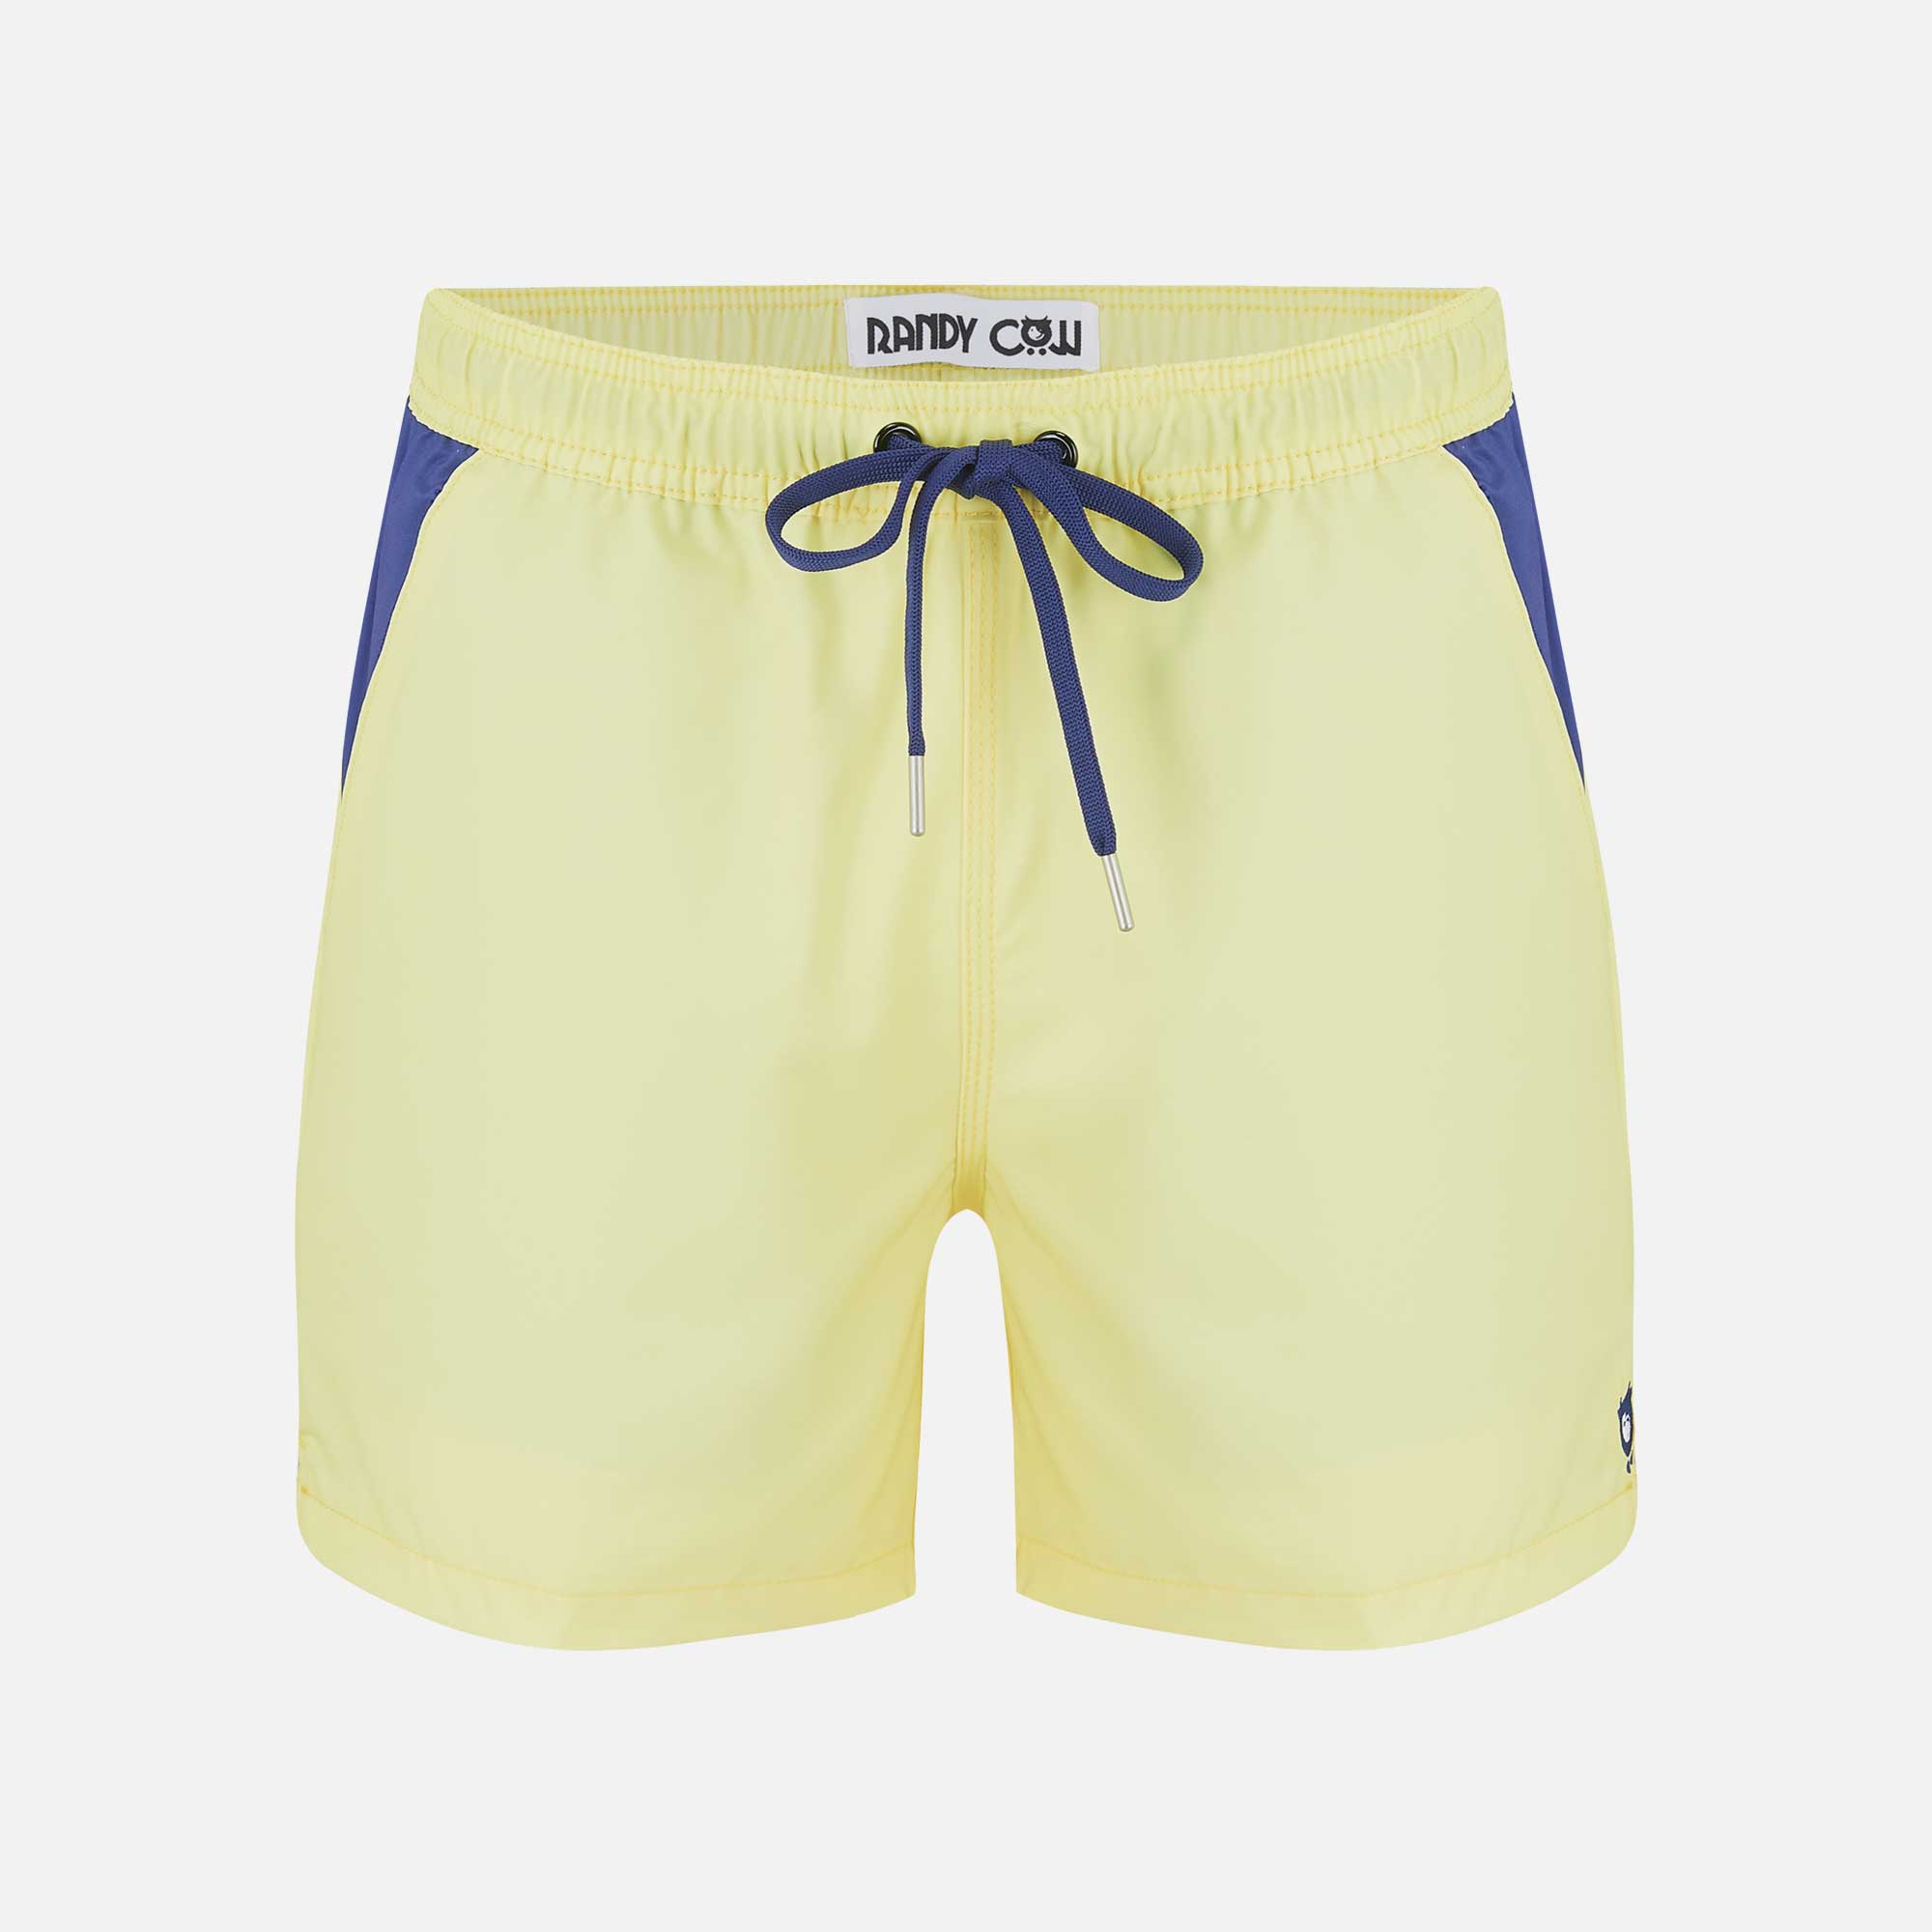 Mens Swim Shorts Trunks with a Waterproof Pocket